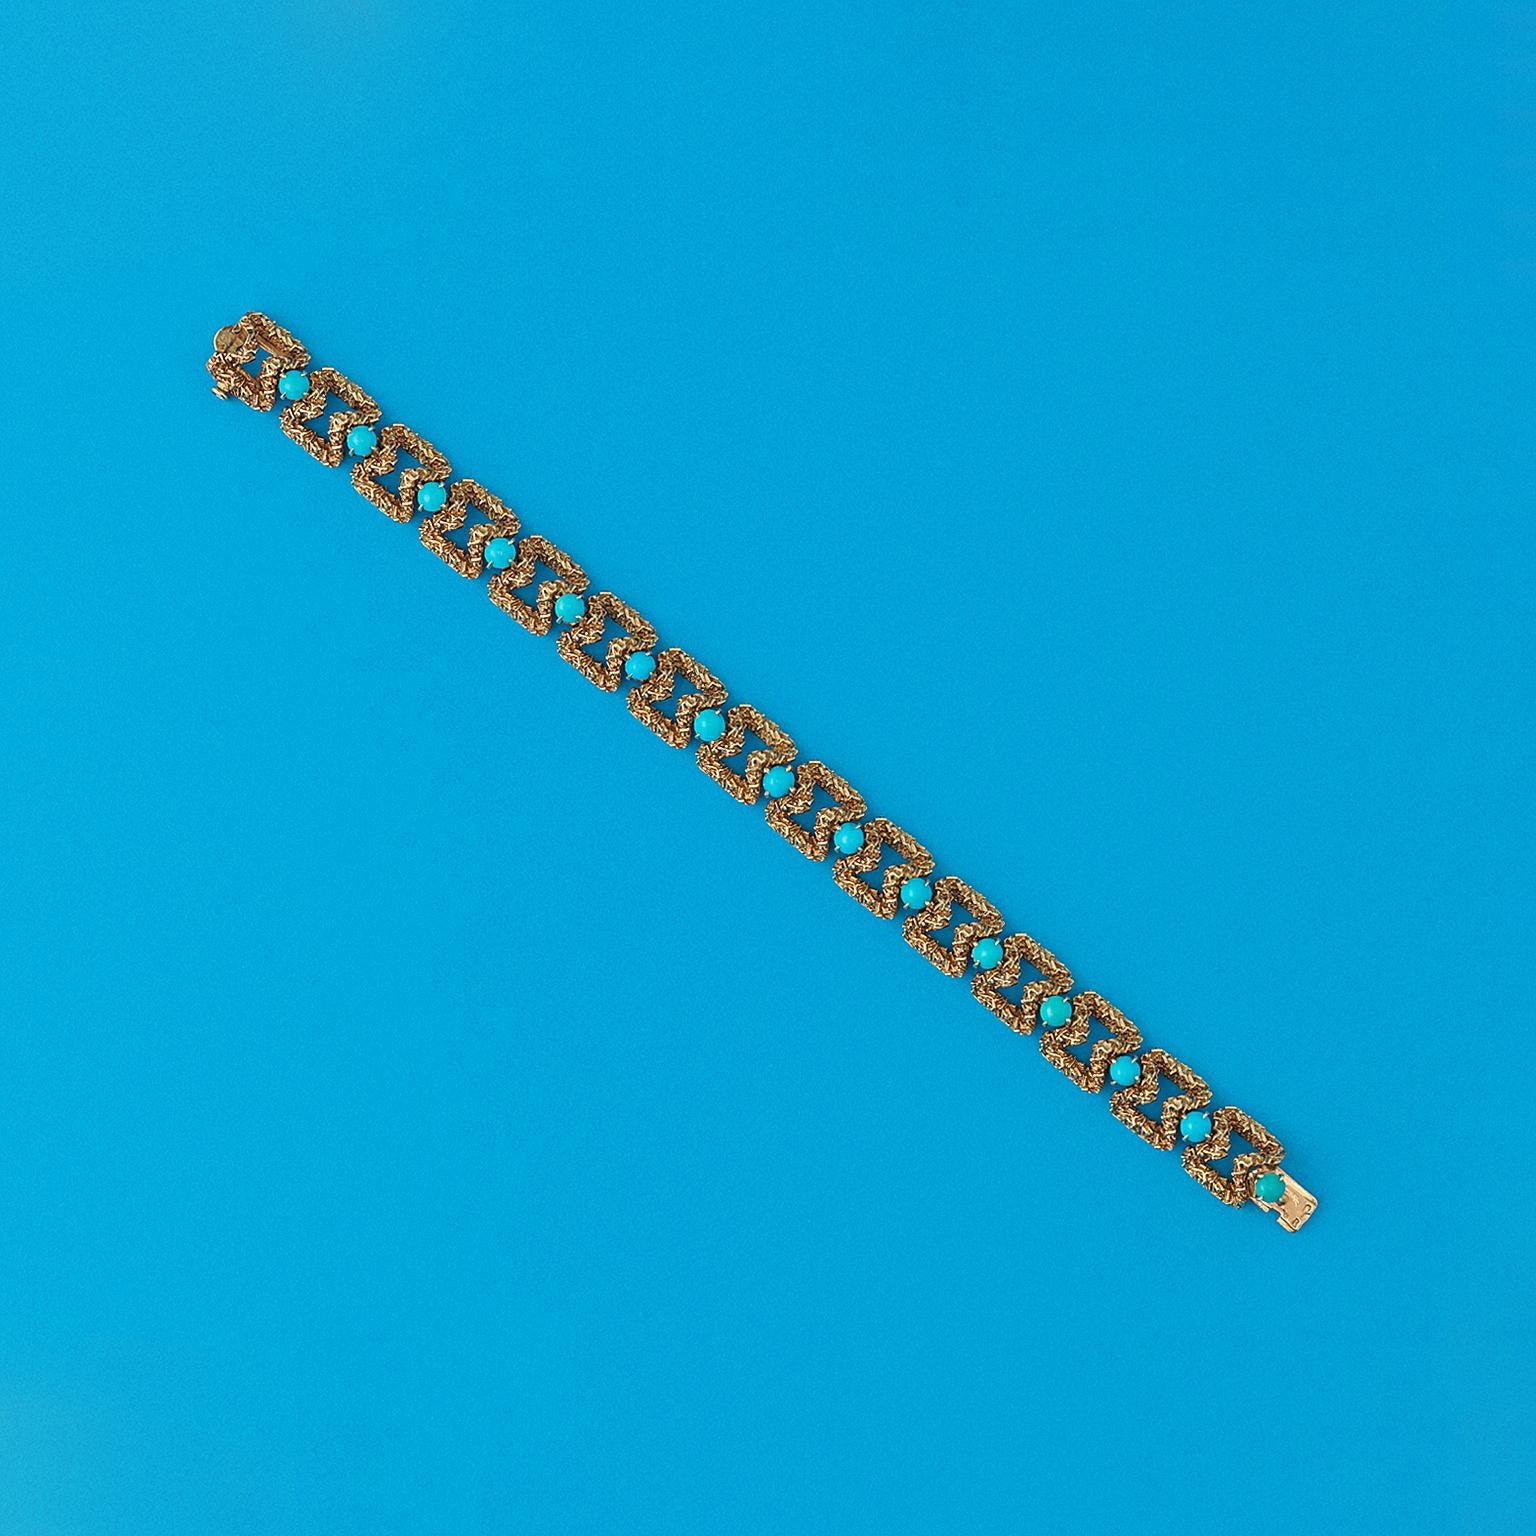 An 18 carat yellow gold bracelet with hourglass shaped links with in between every two links a cabochon cut turquoise in a tiny four claw mounting, signed: Mauboussin Paris, circa 1960.

weight: 41.71 grams 
length: 18 cm well fitted for a wrist